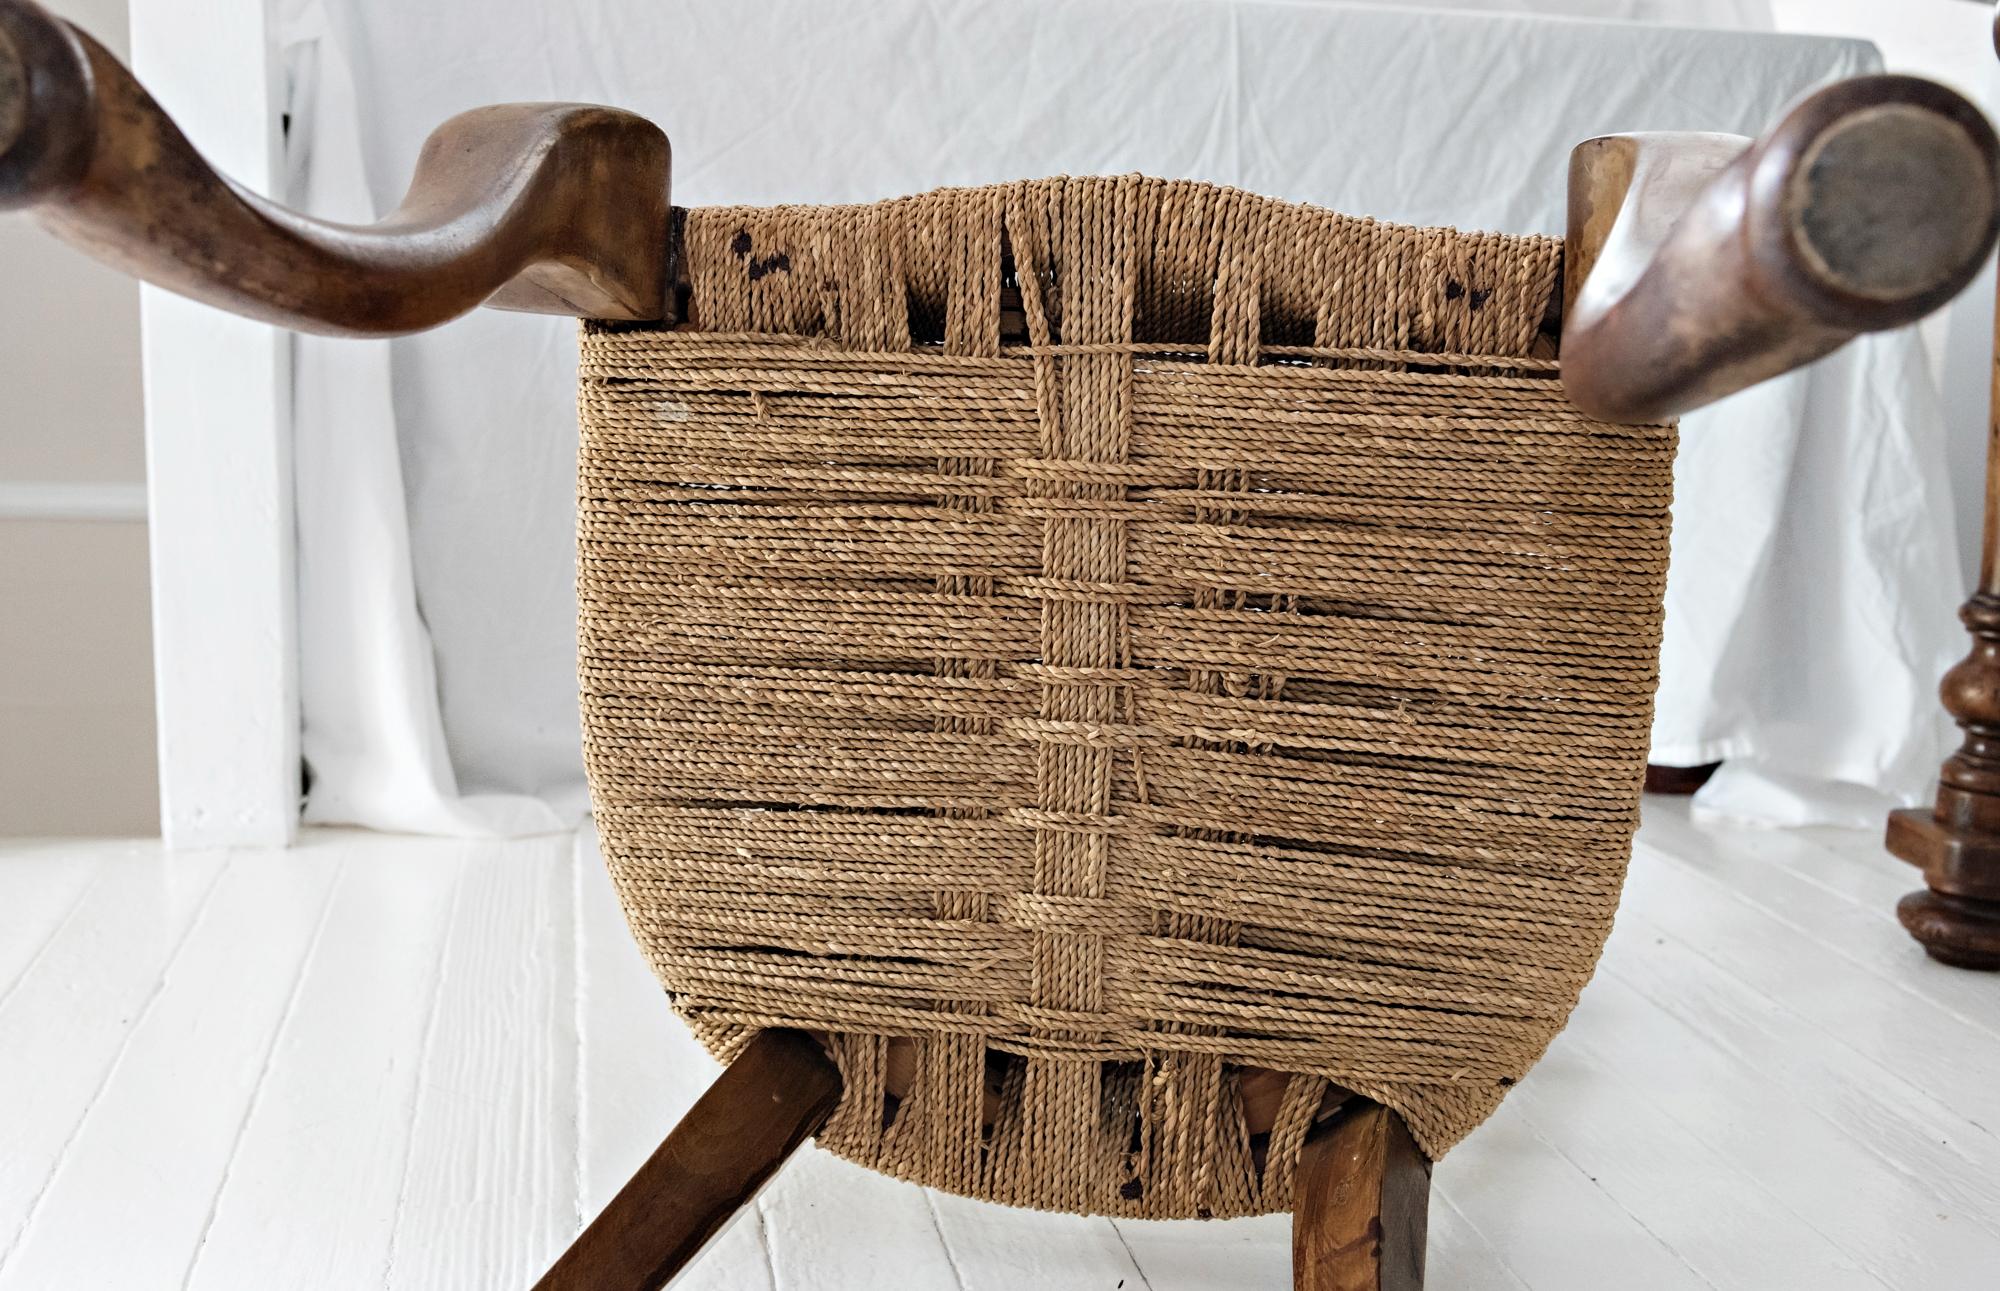 Woven Italian Ladder Back, Cabriolet Leg Chairs with Hoof Feet and Rush Seats   For Sale